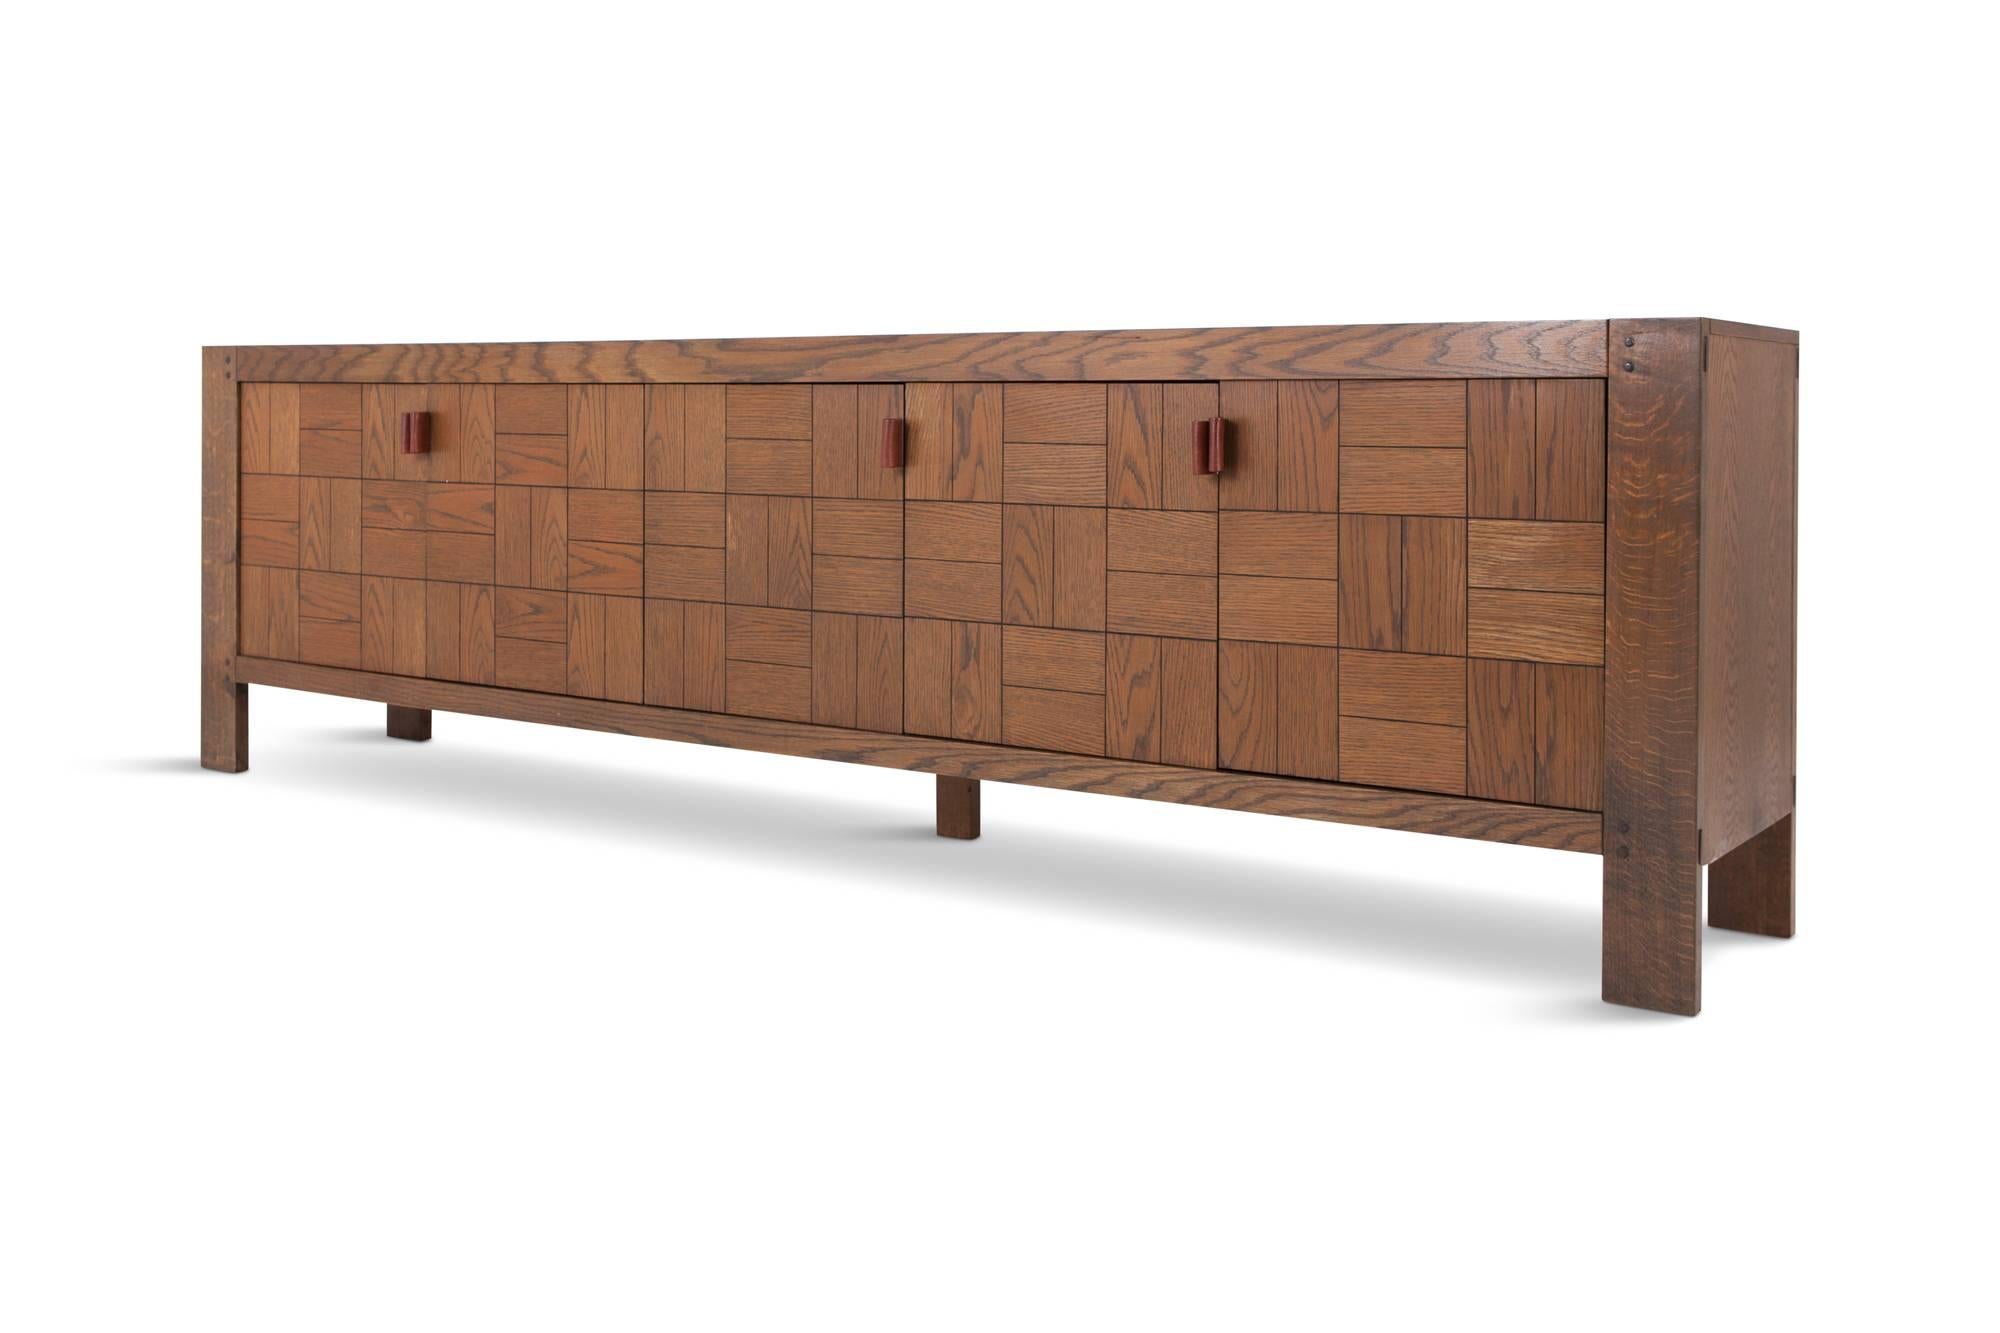 Late 20th Century Brutalist Credenza in Stained Oak with Leather Handles